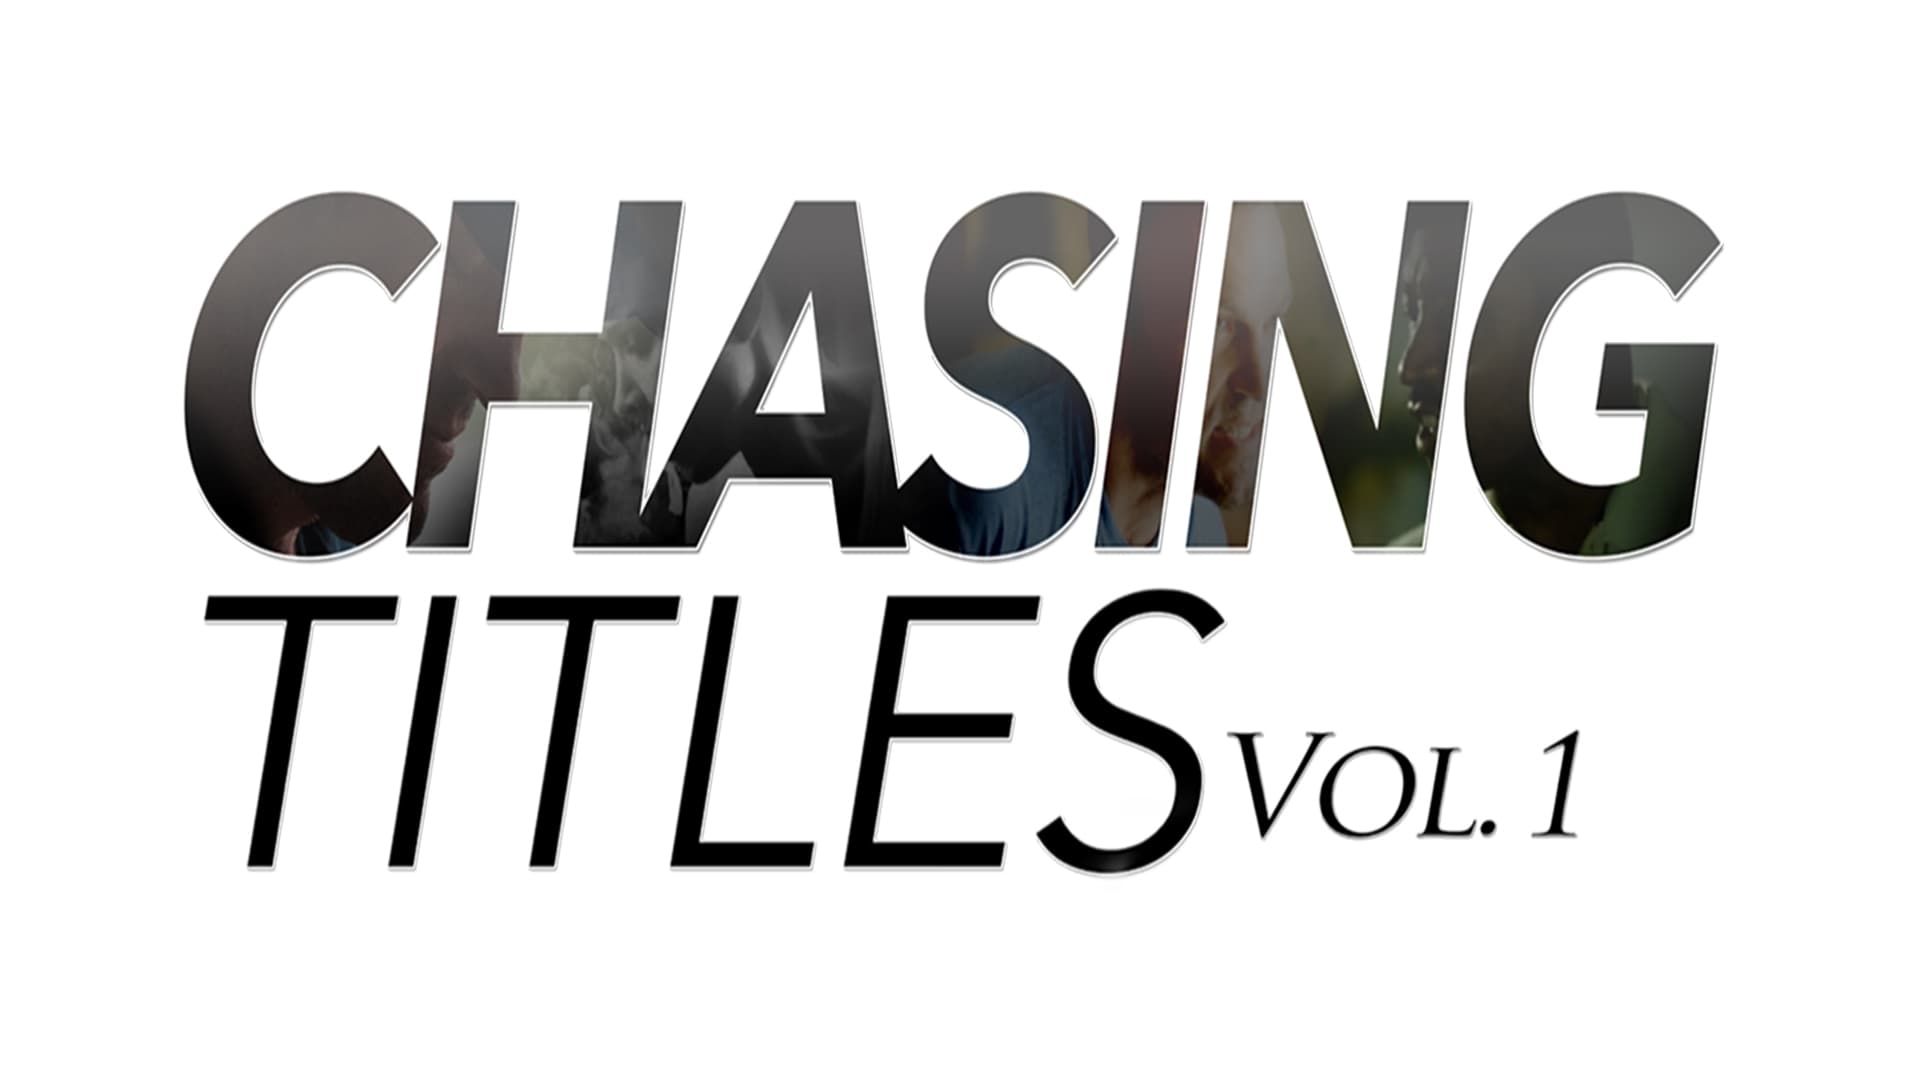 Chasing Titles Vol. 1 background